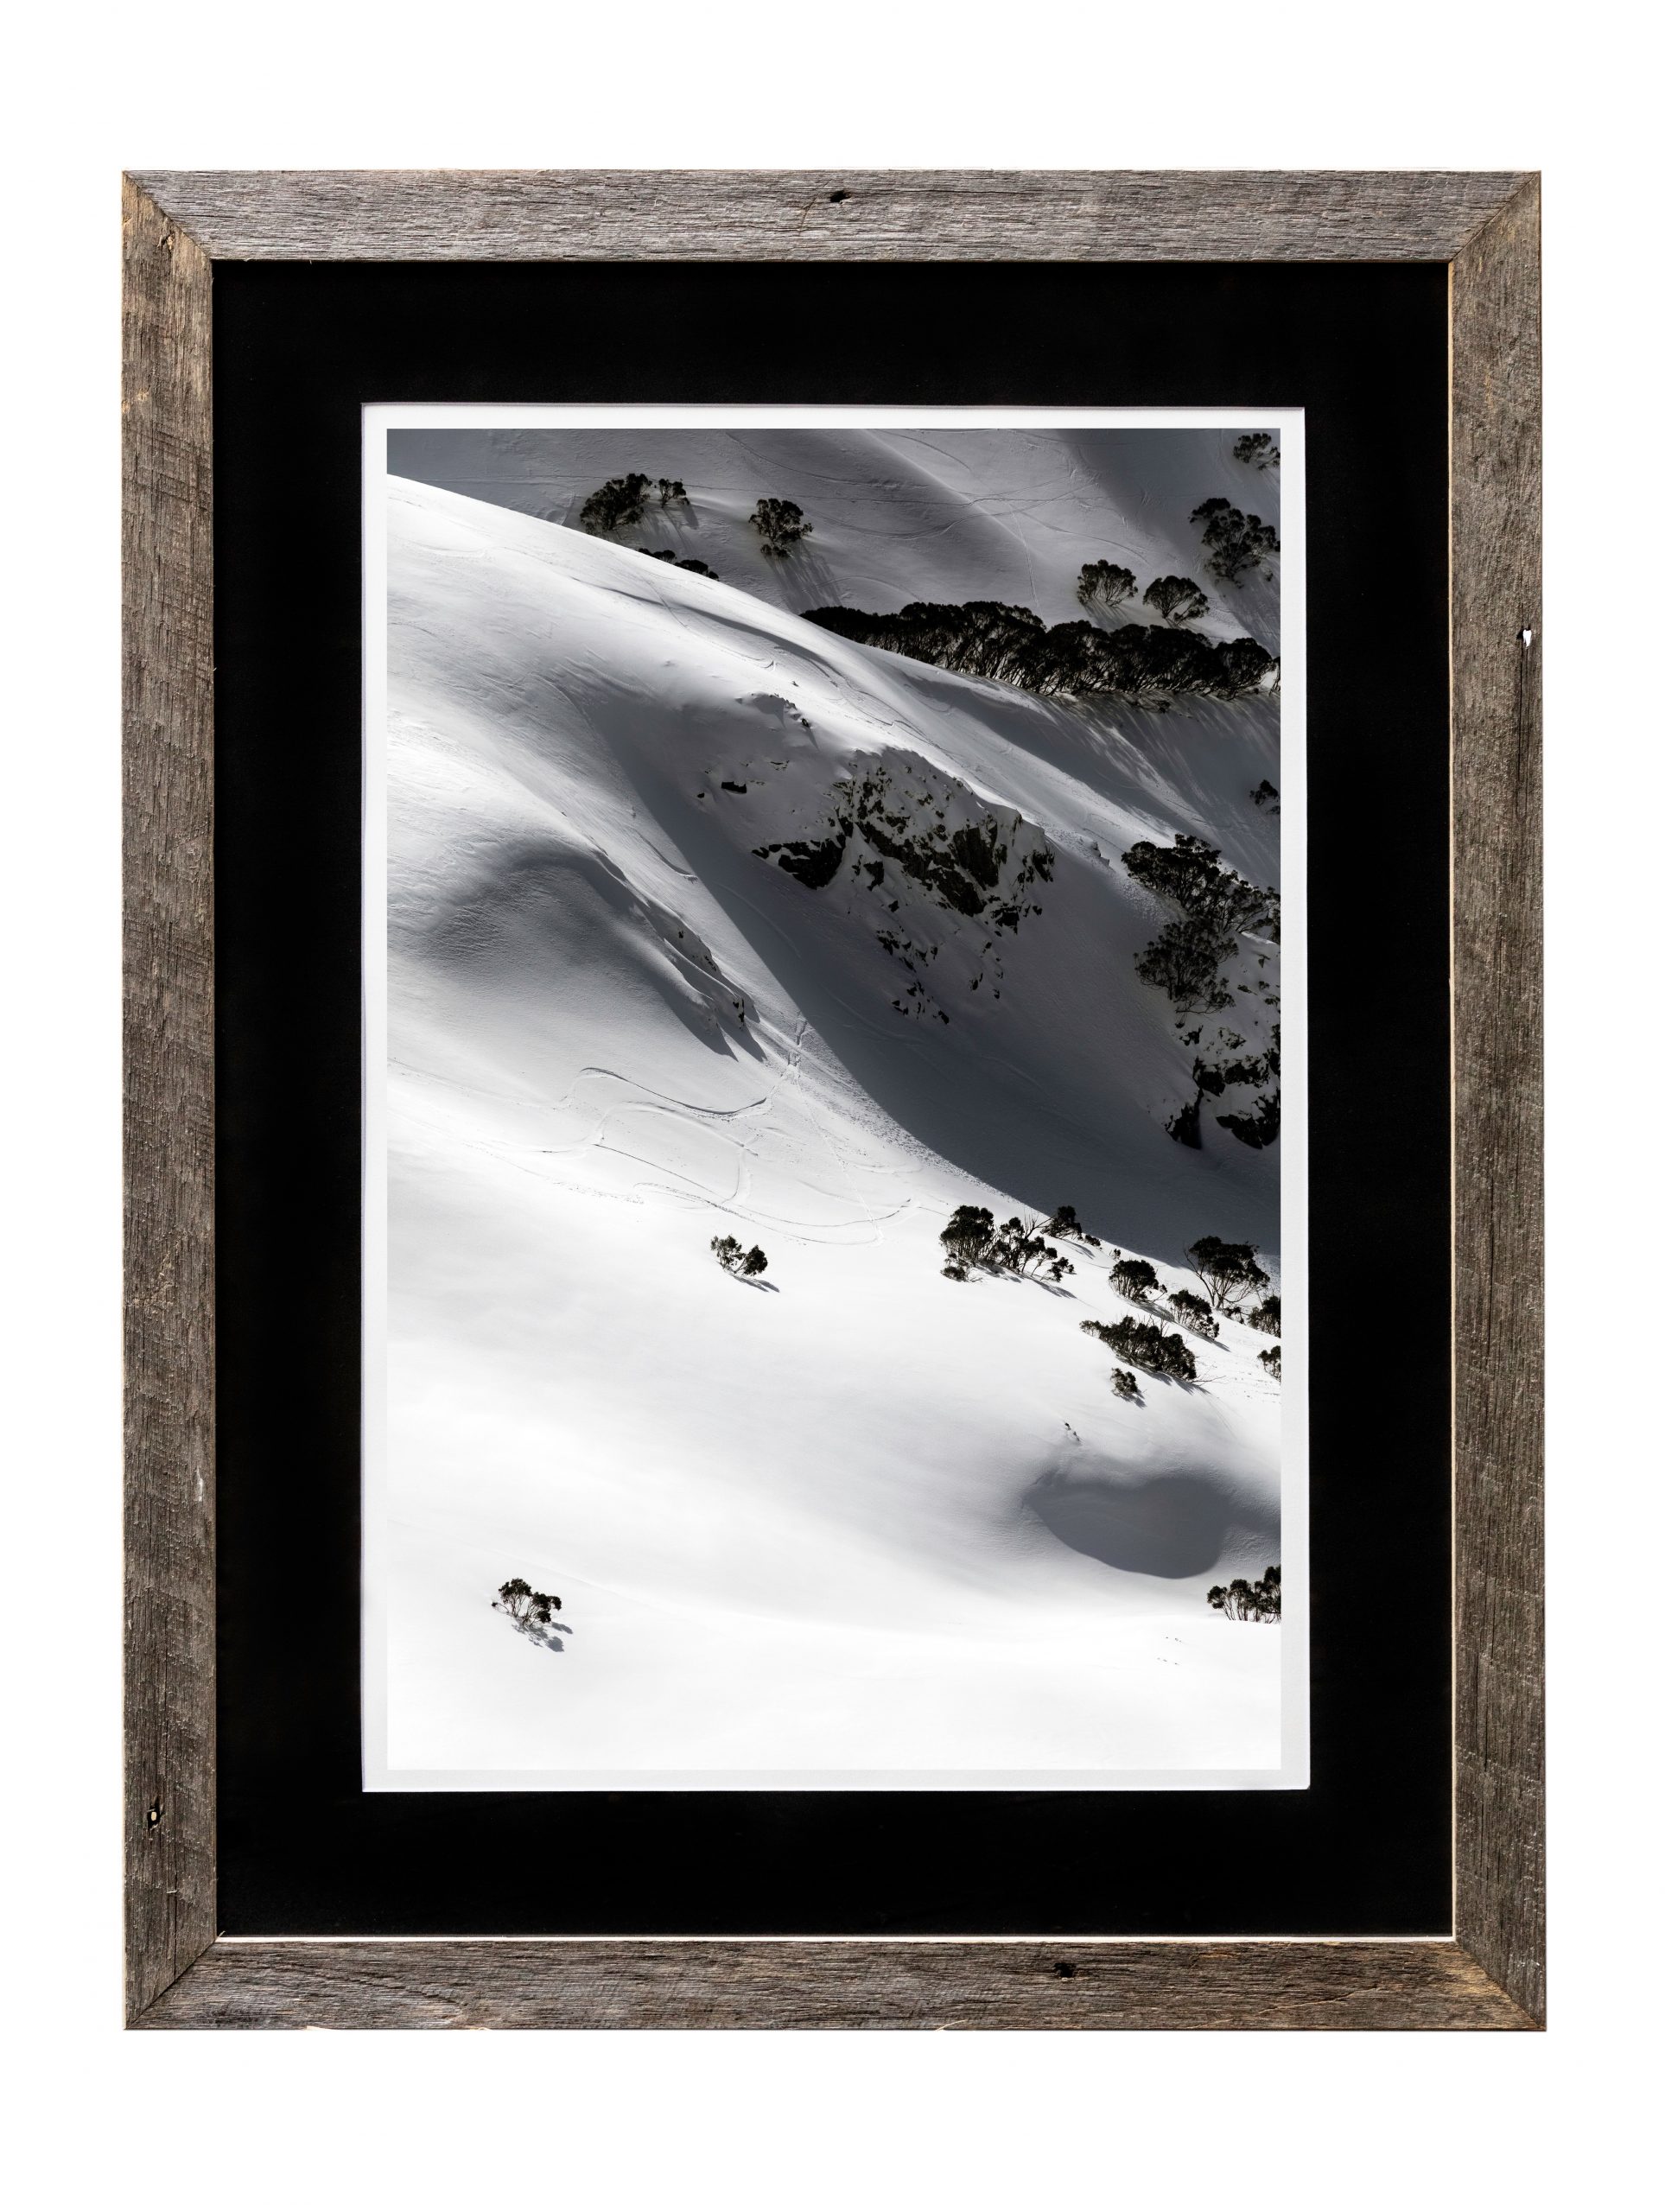 Alpine 1/7 by Penny Prangnell. Framed fine art photography for sale on Bluethumb.